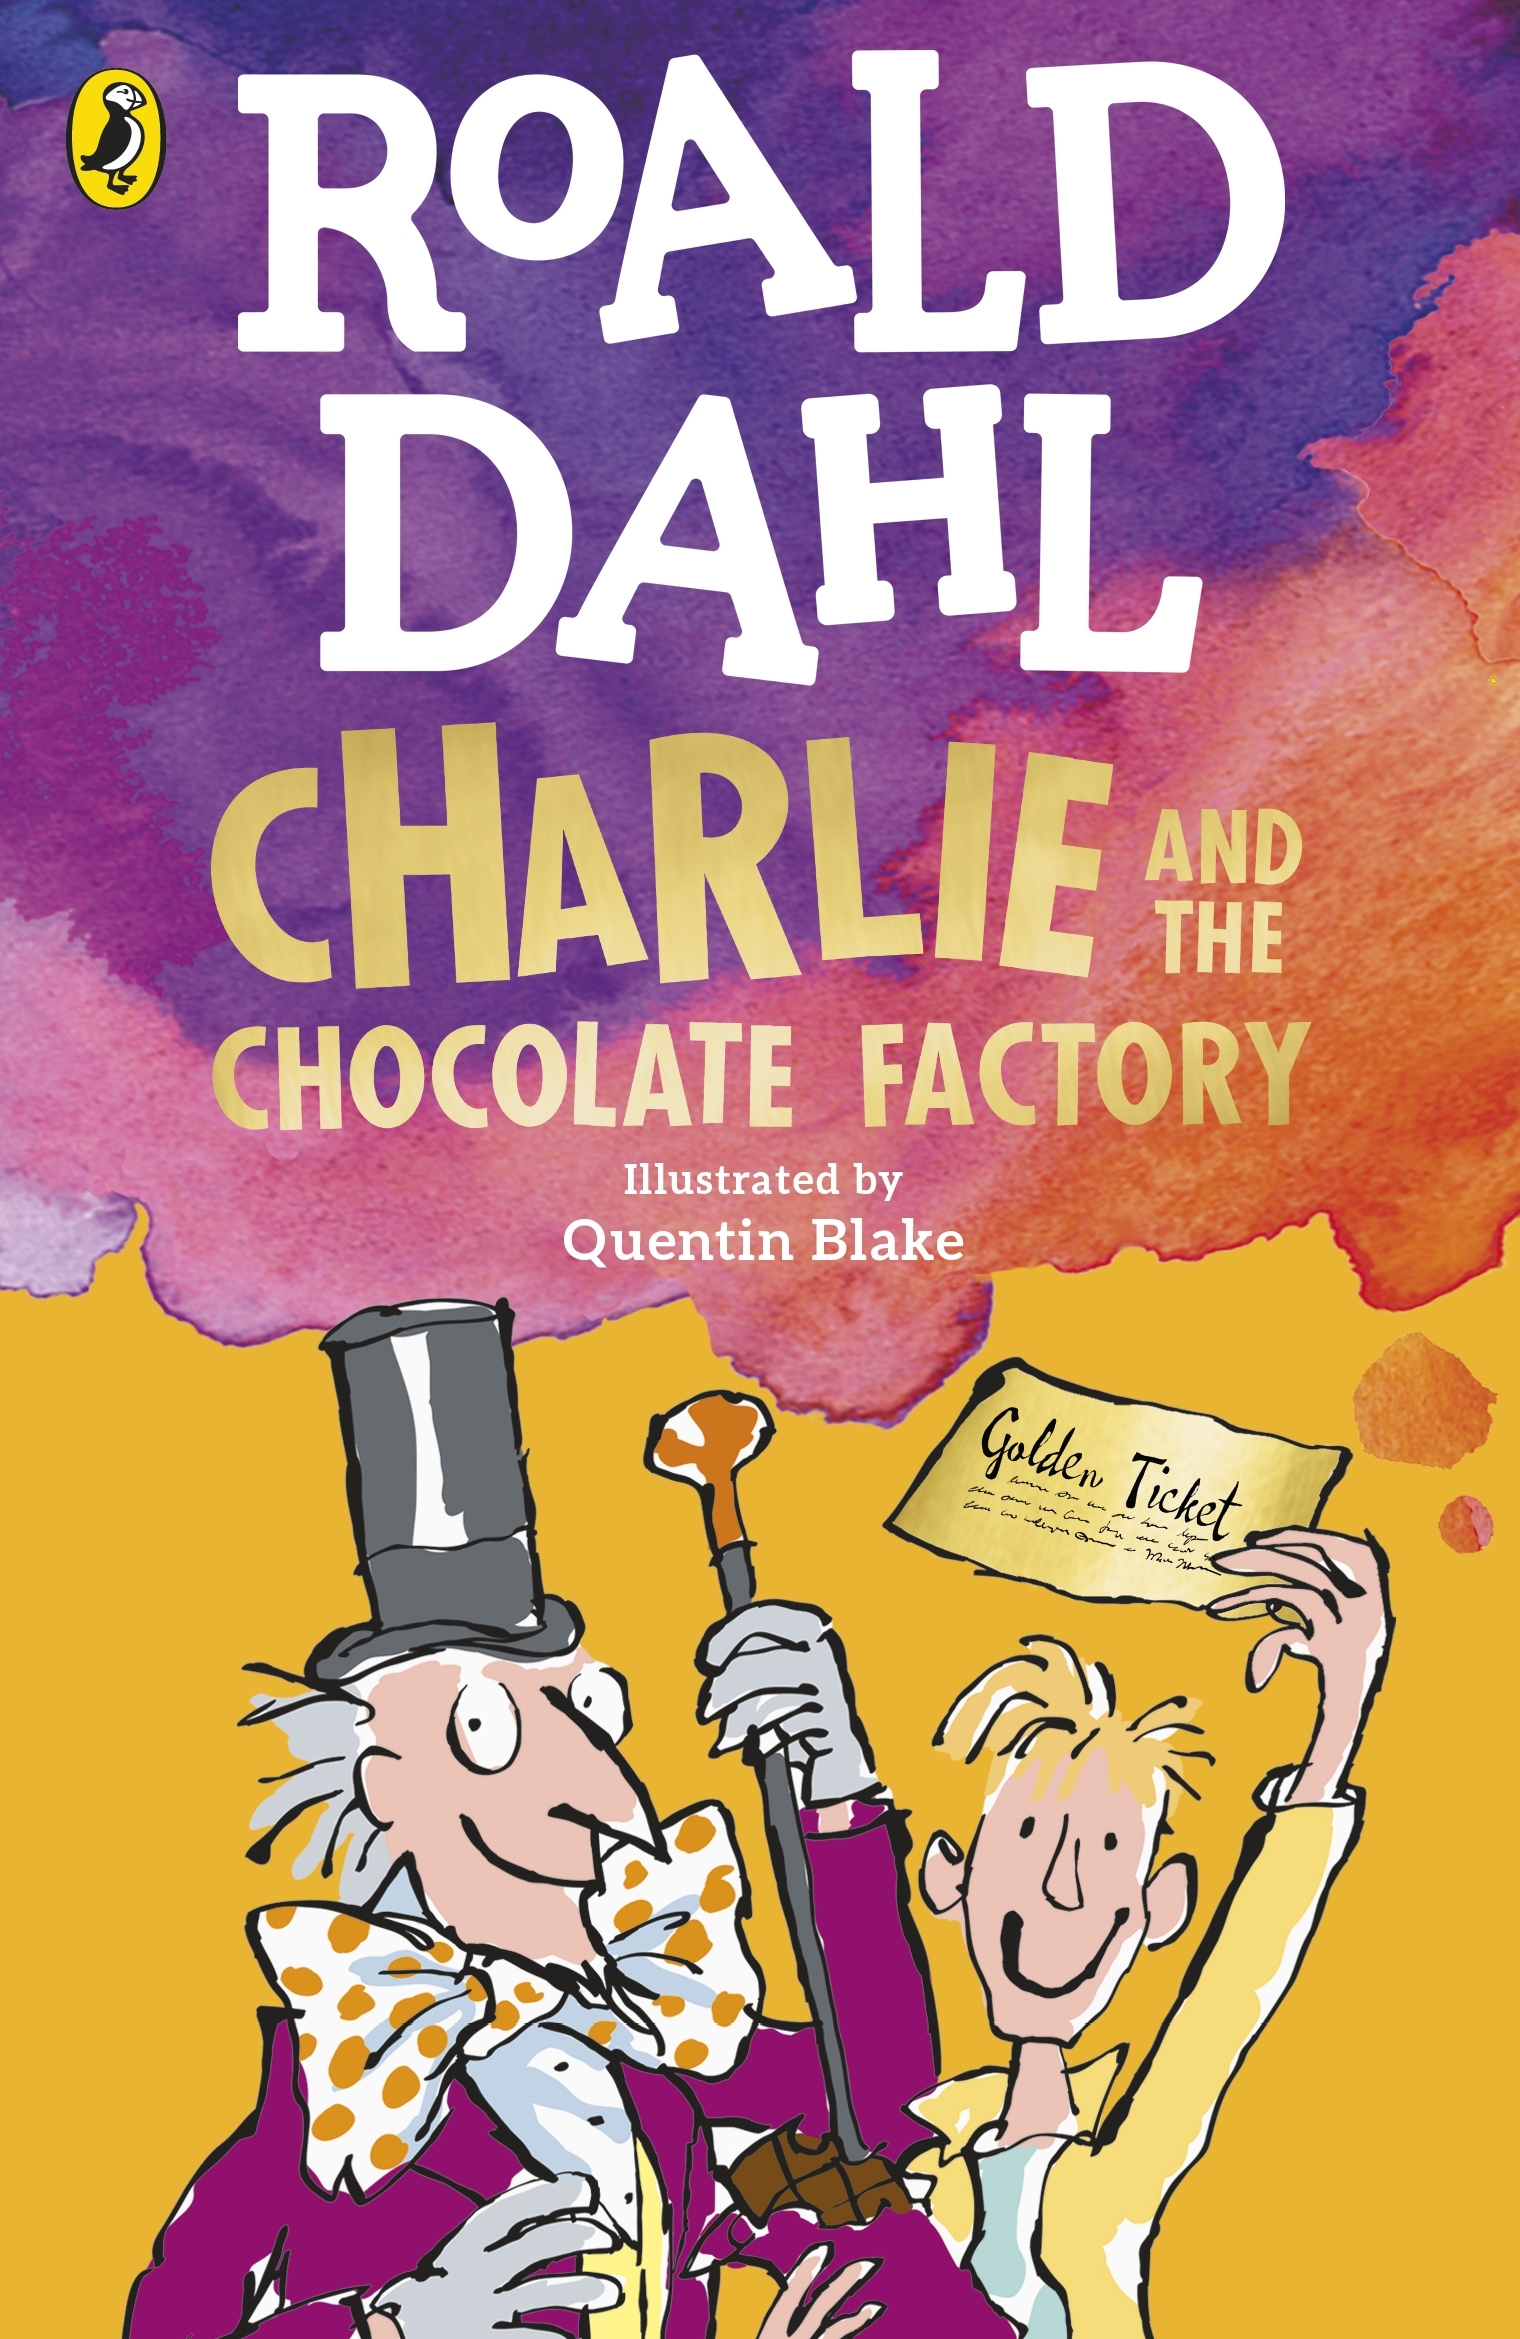 roald dahl book review charlie and the chocolate factory